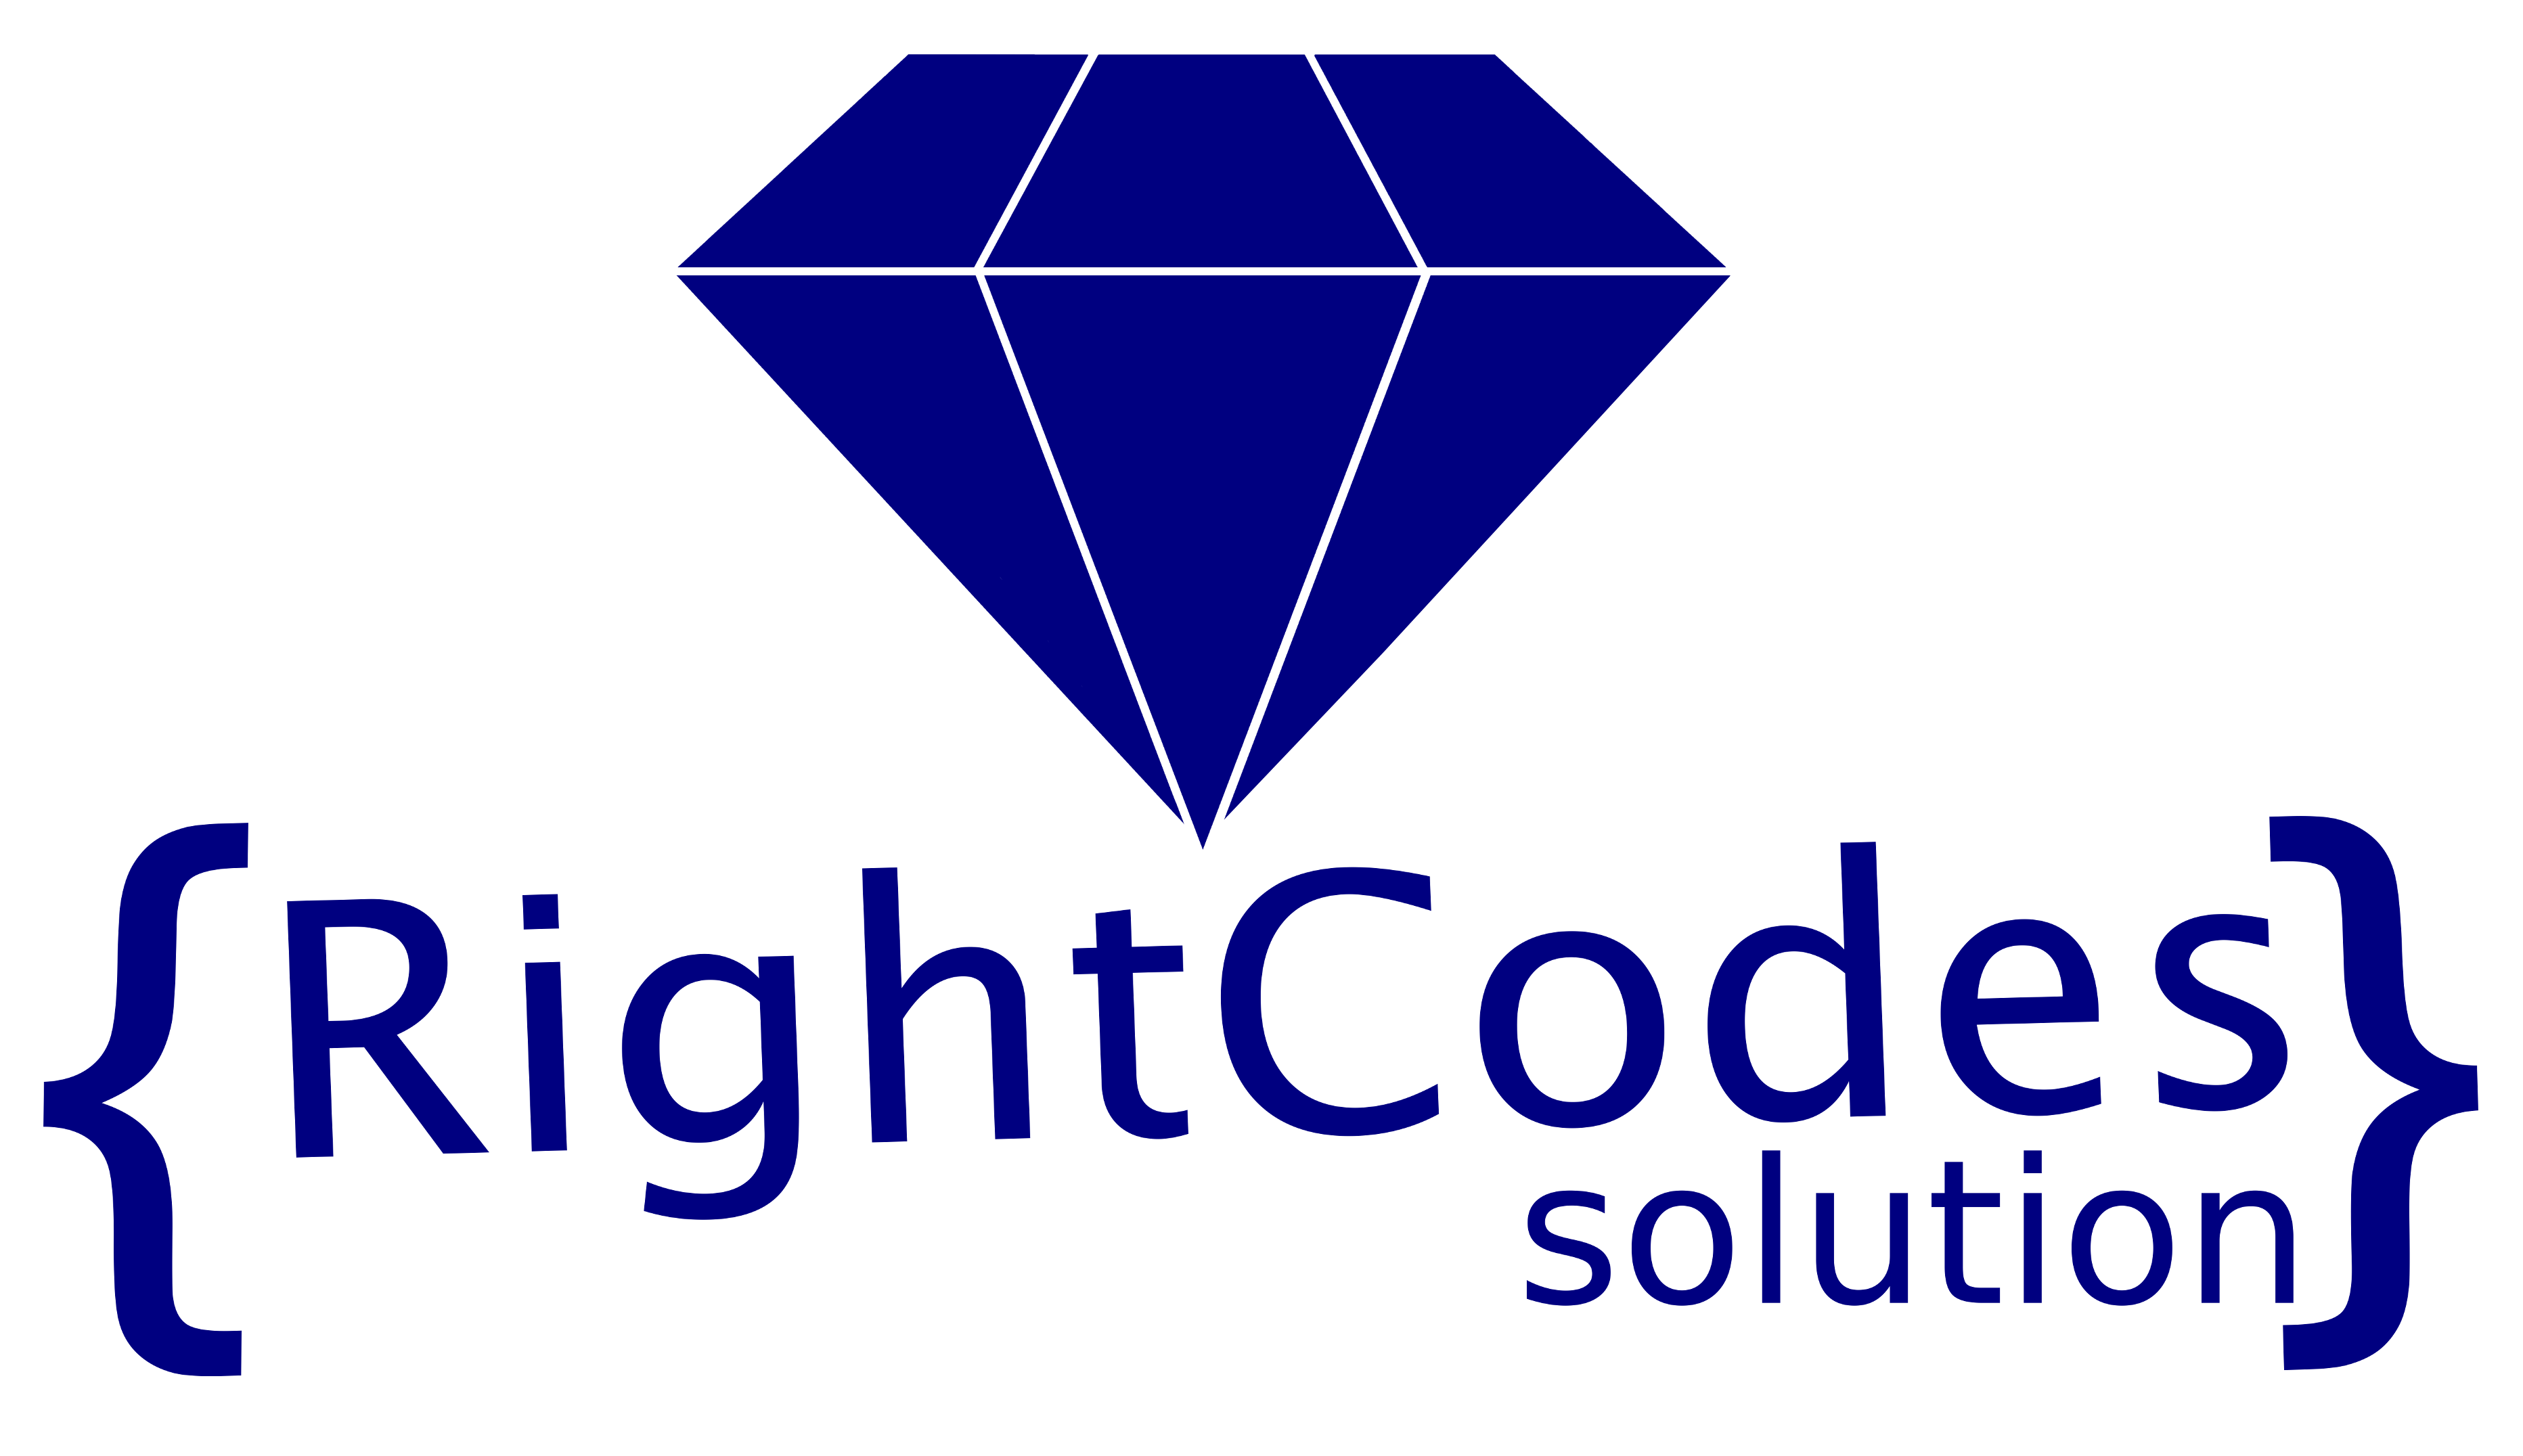 RightCodes Solution